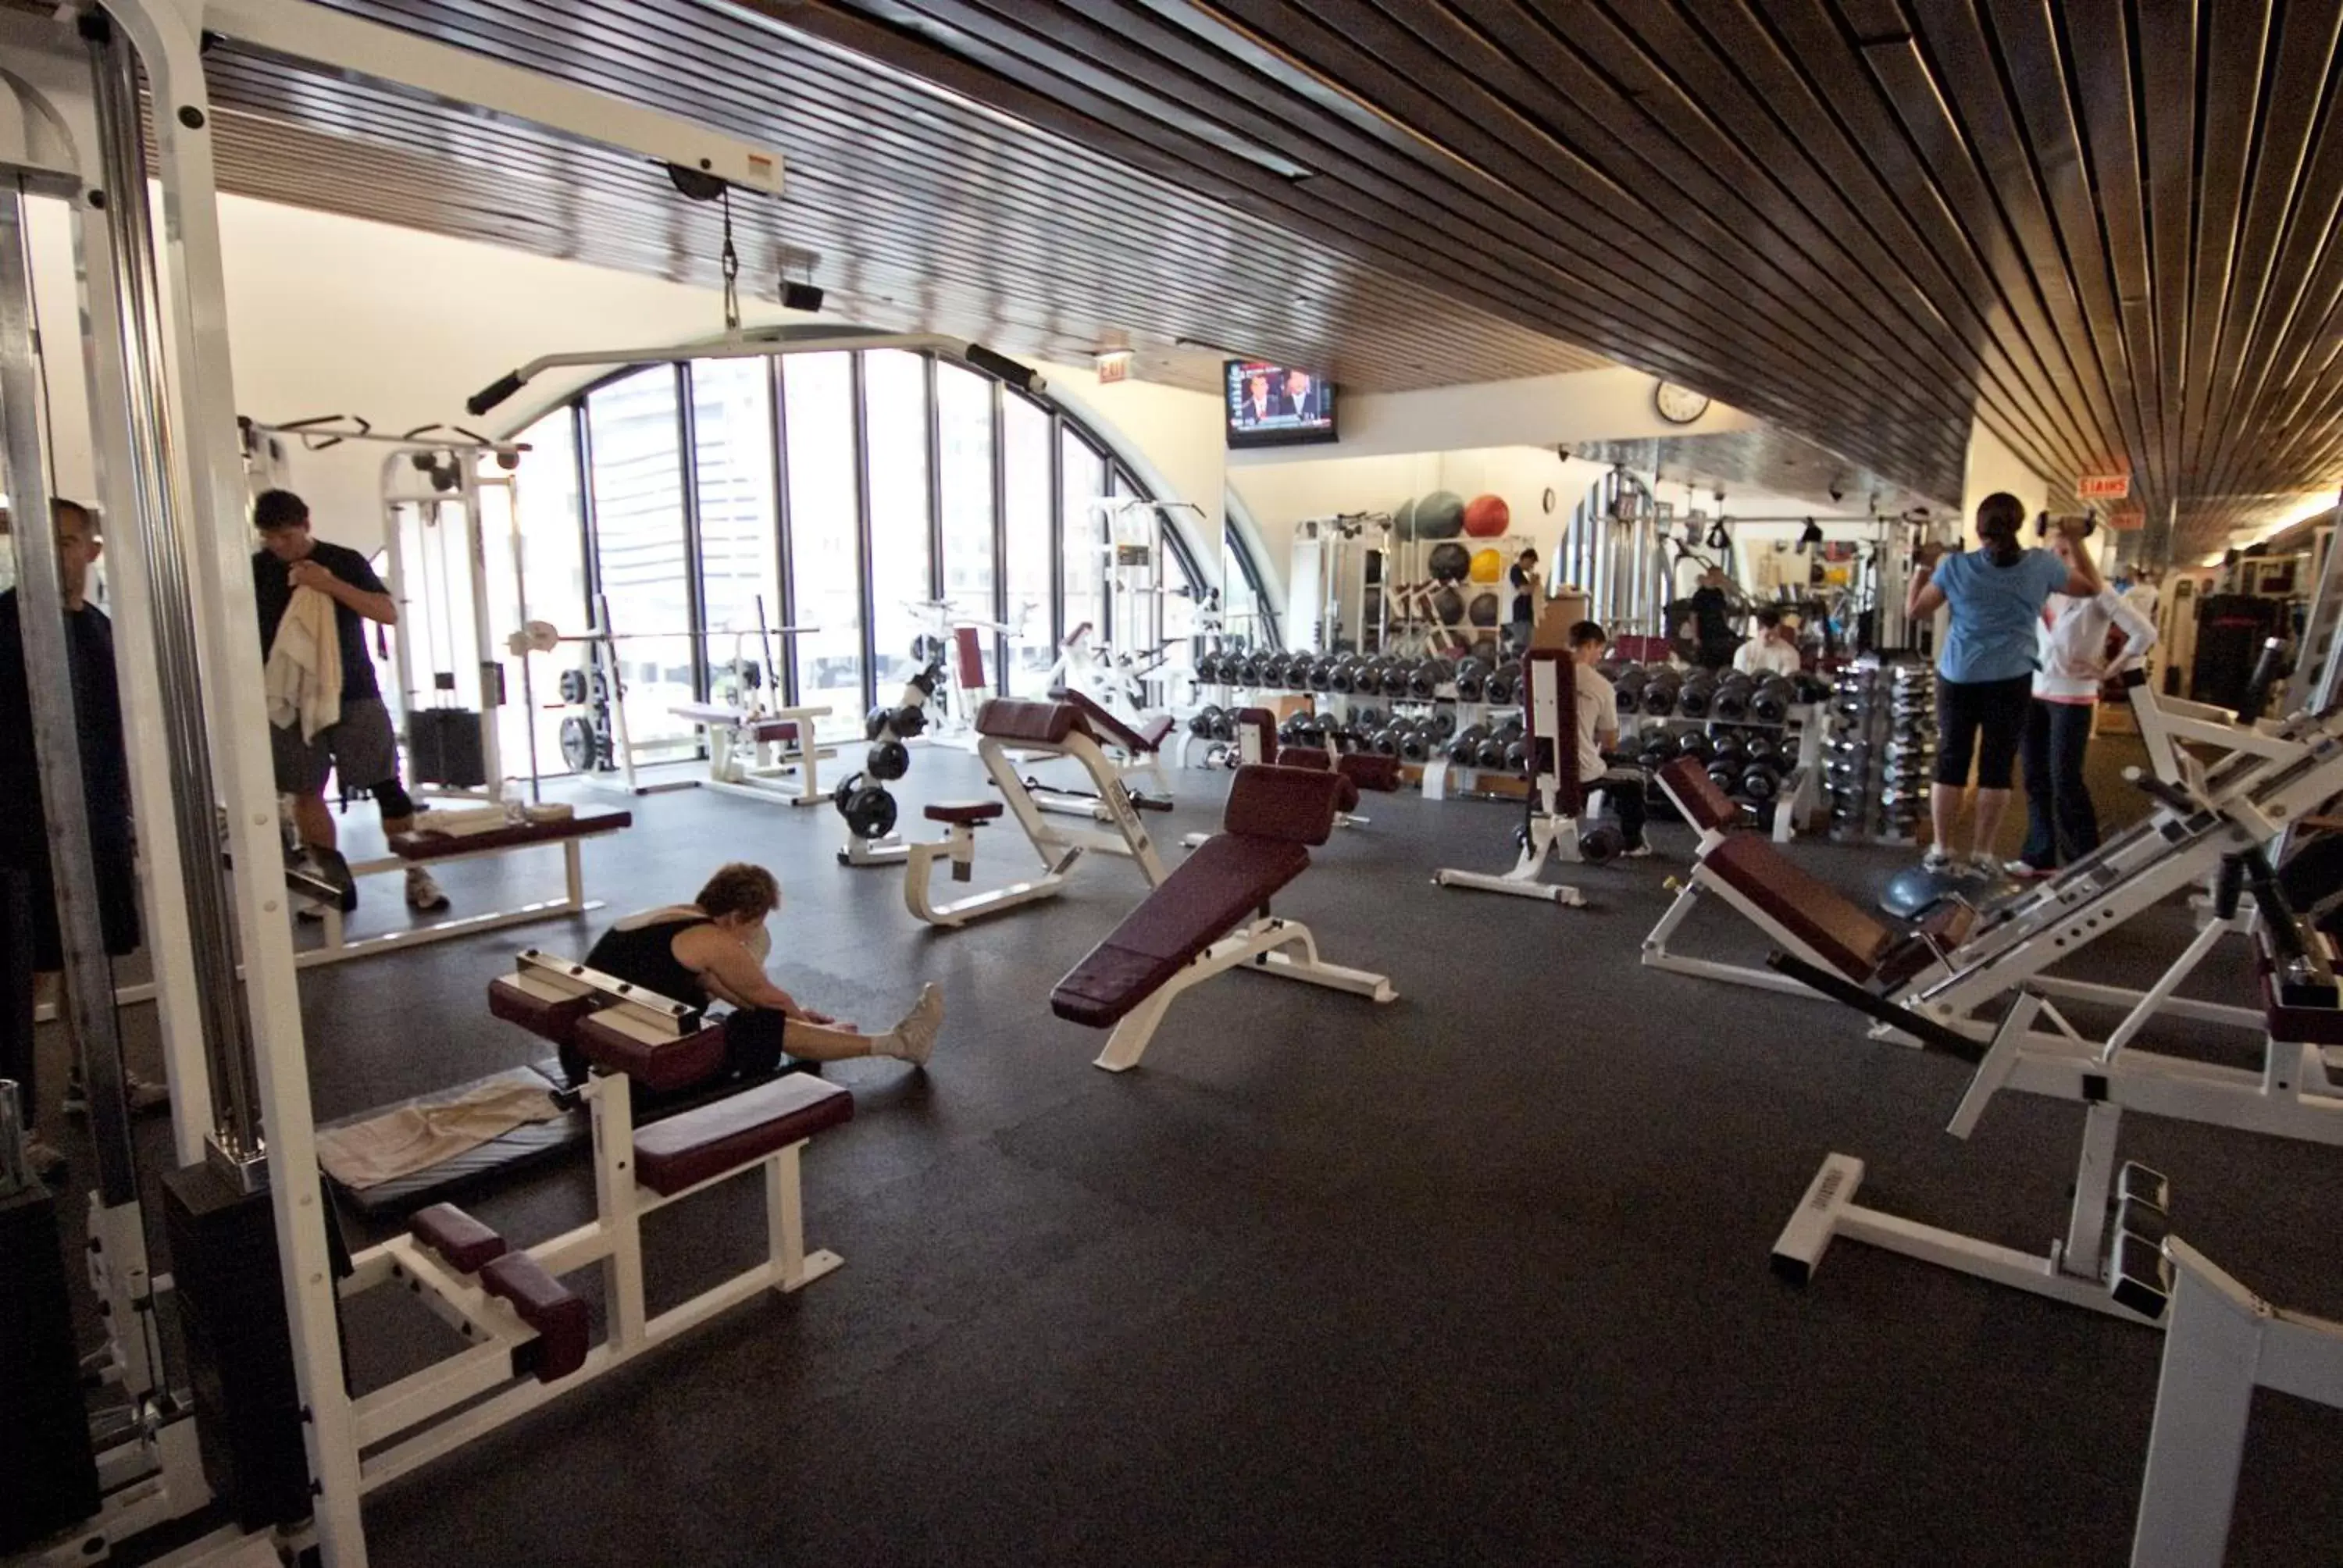 Fitness centre/facilities, Fitness Center/Facilities in The Buckingham Hotel